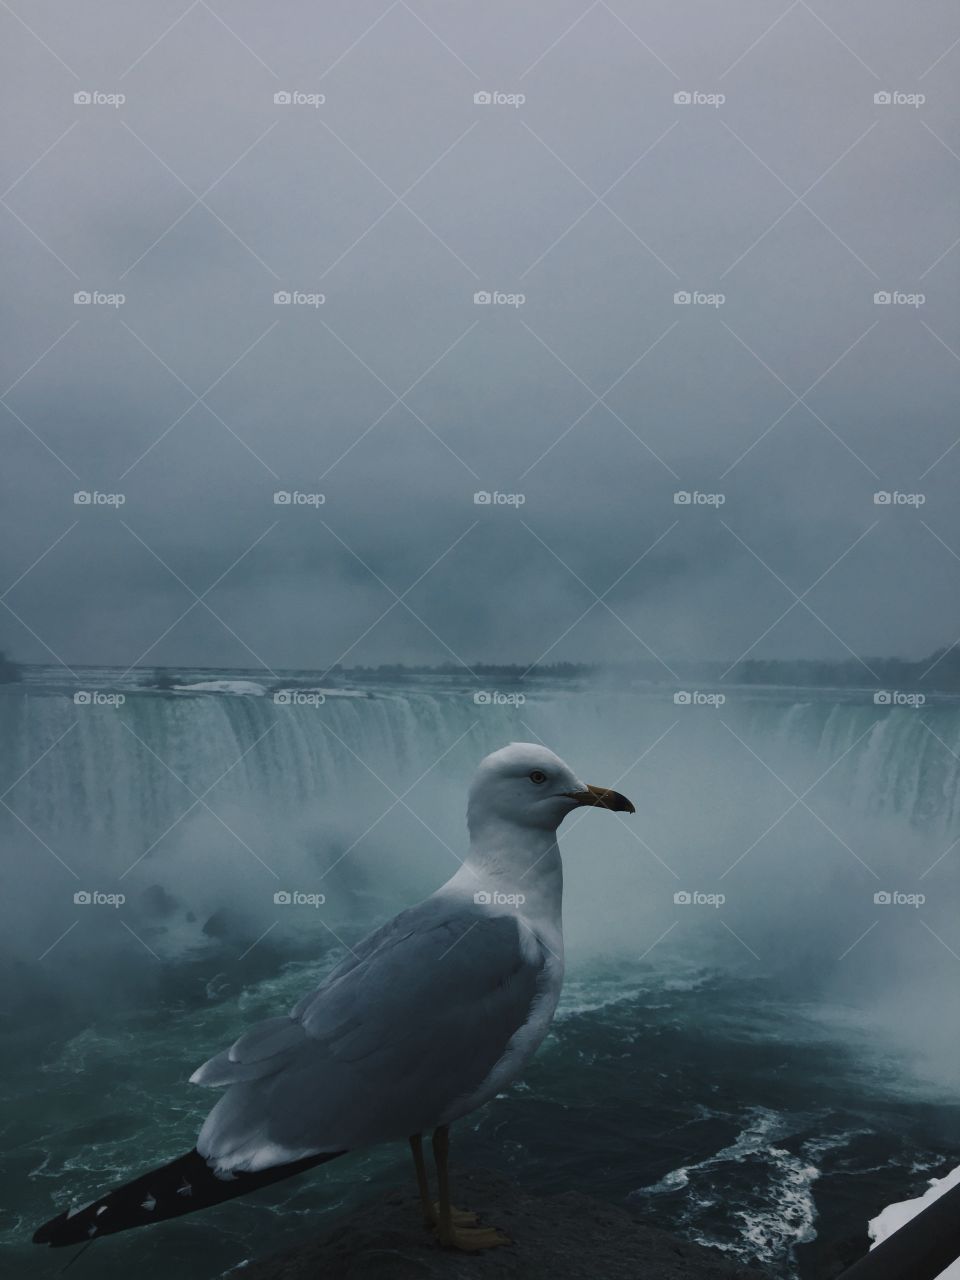 Seagull getting a nice photo taken in front of the Ontario Niagara Falls! 